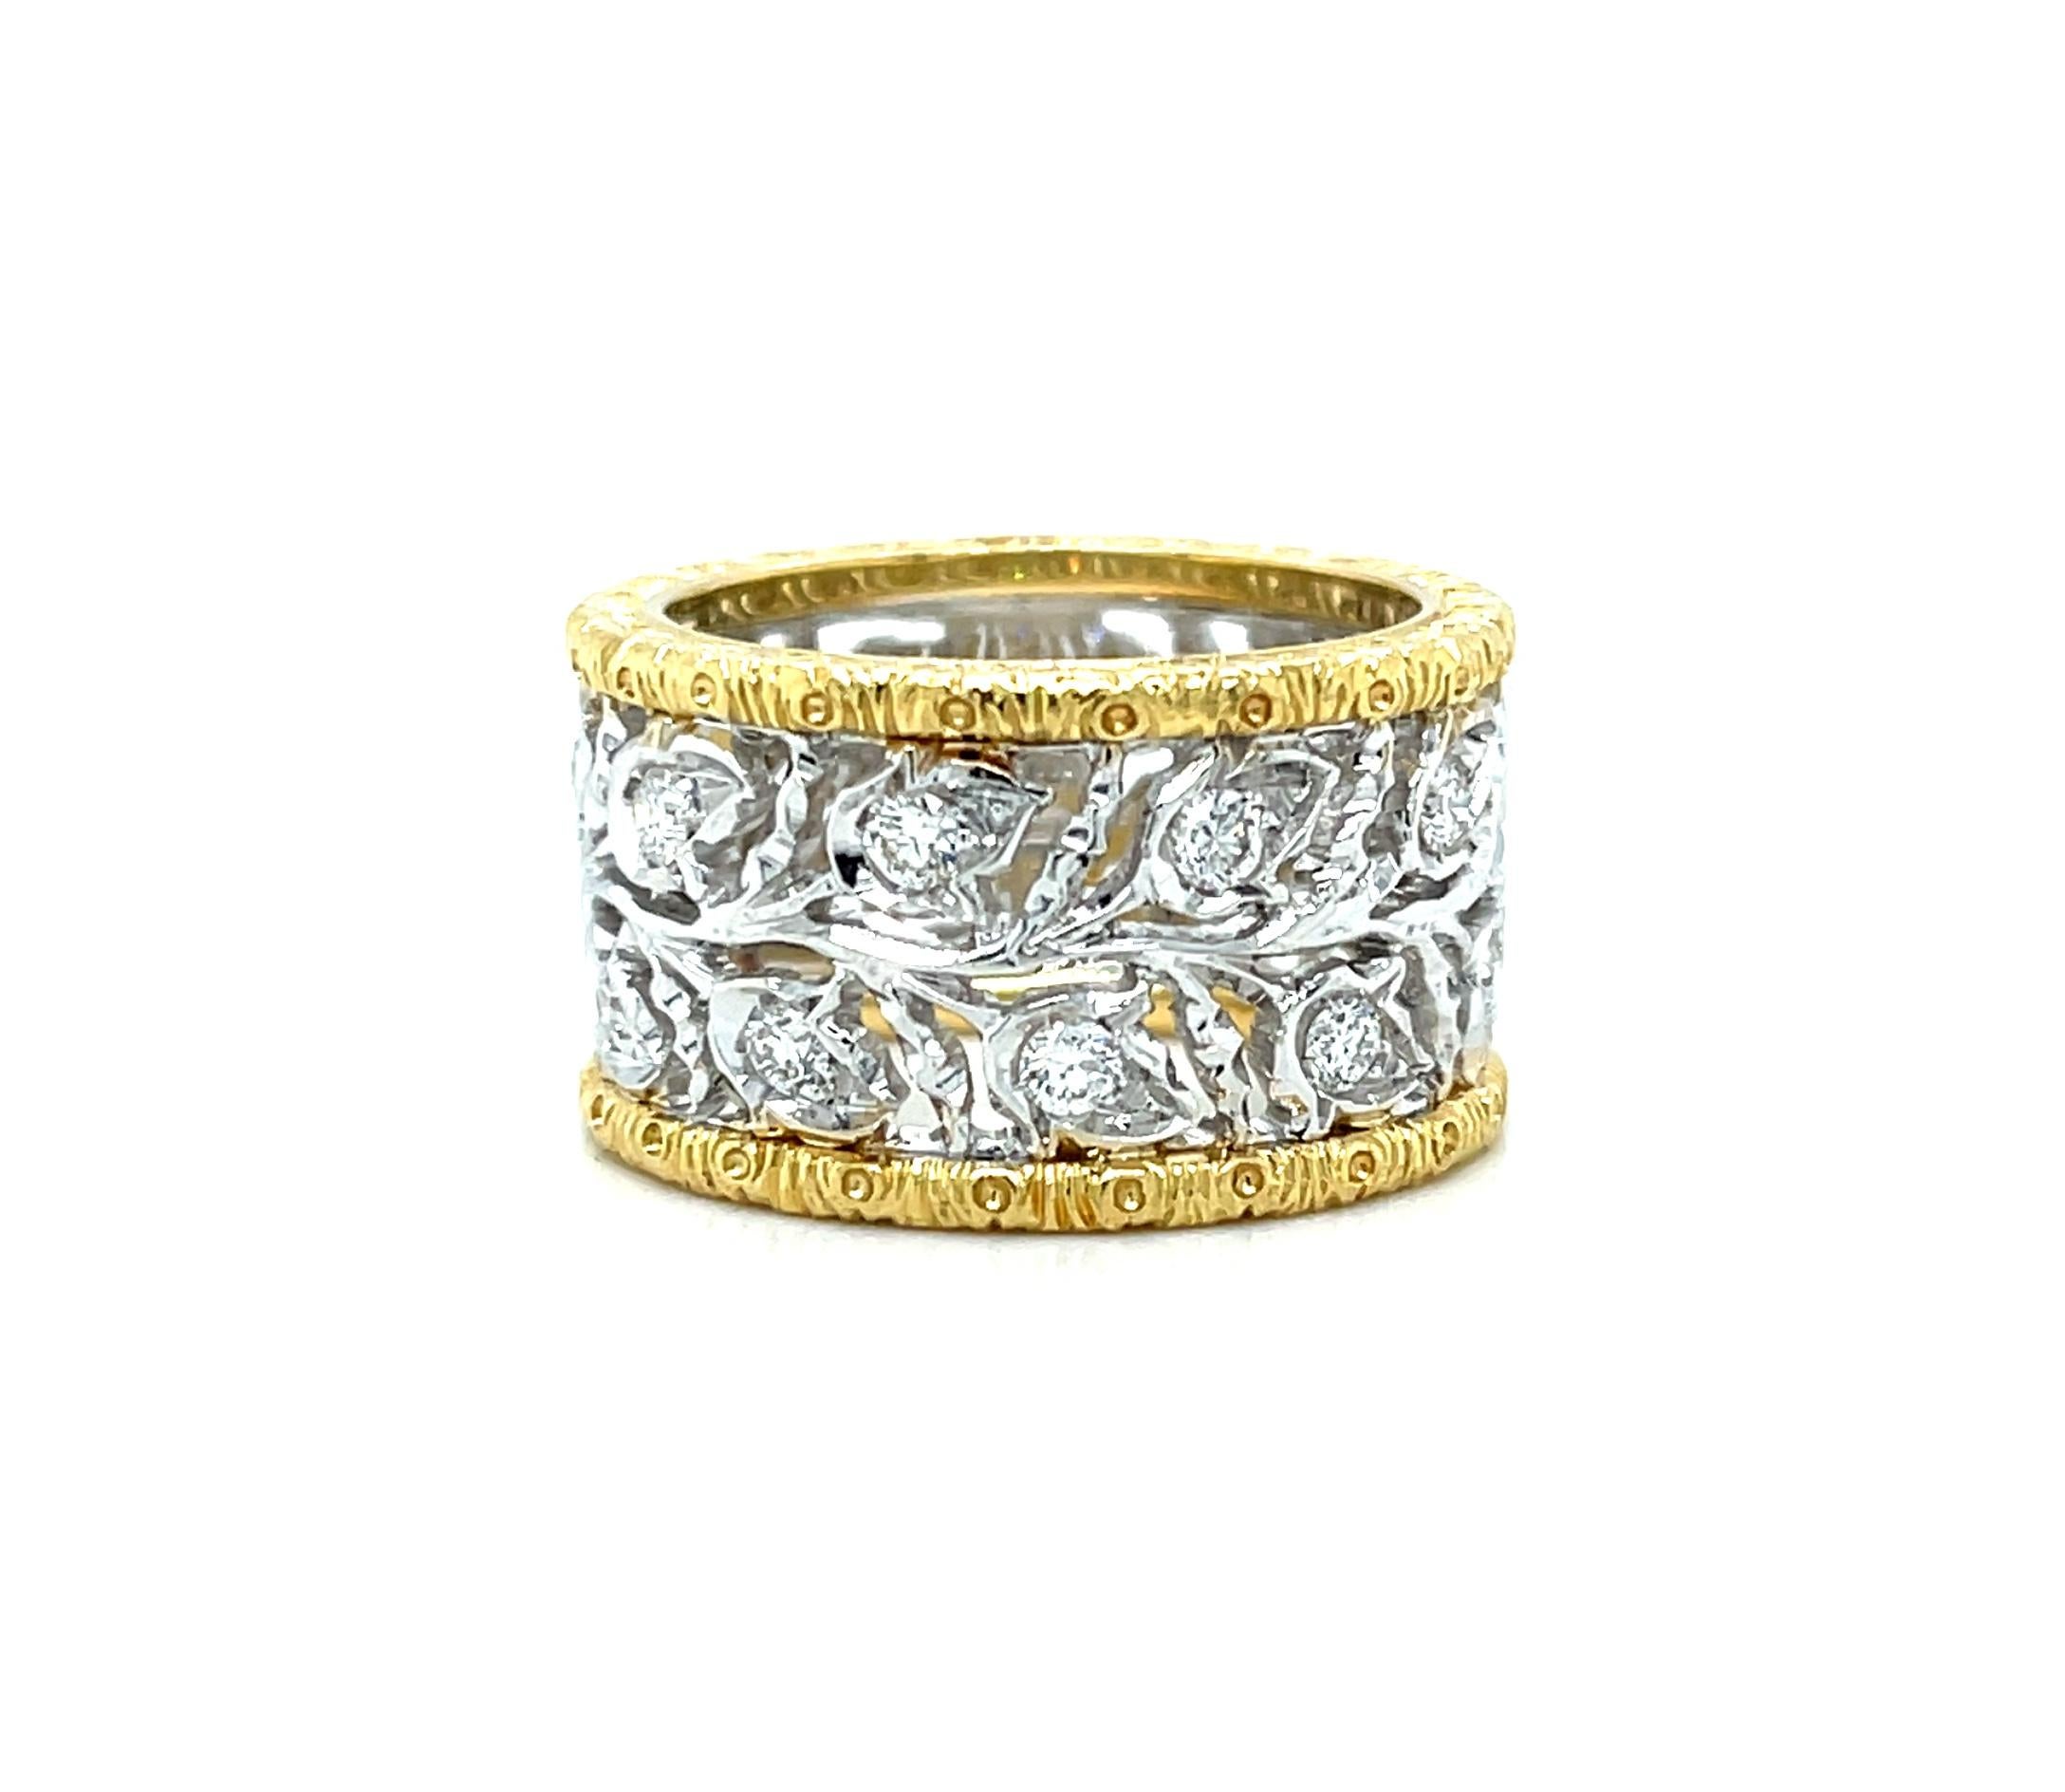 This handmade Florentine style band was created by our artisan jewelers in Italy and displays a superior level of quality and craftsmanship. 18k white gold openwork covers the entire surface of the wide band, and engraved 18k yellow gold edges on